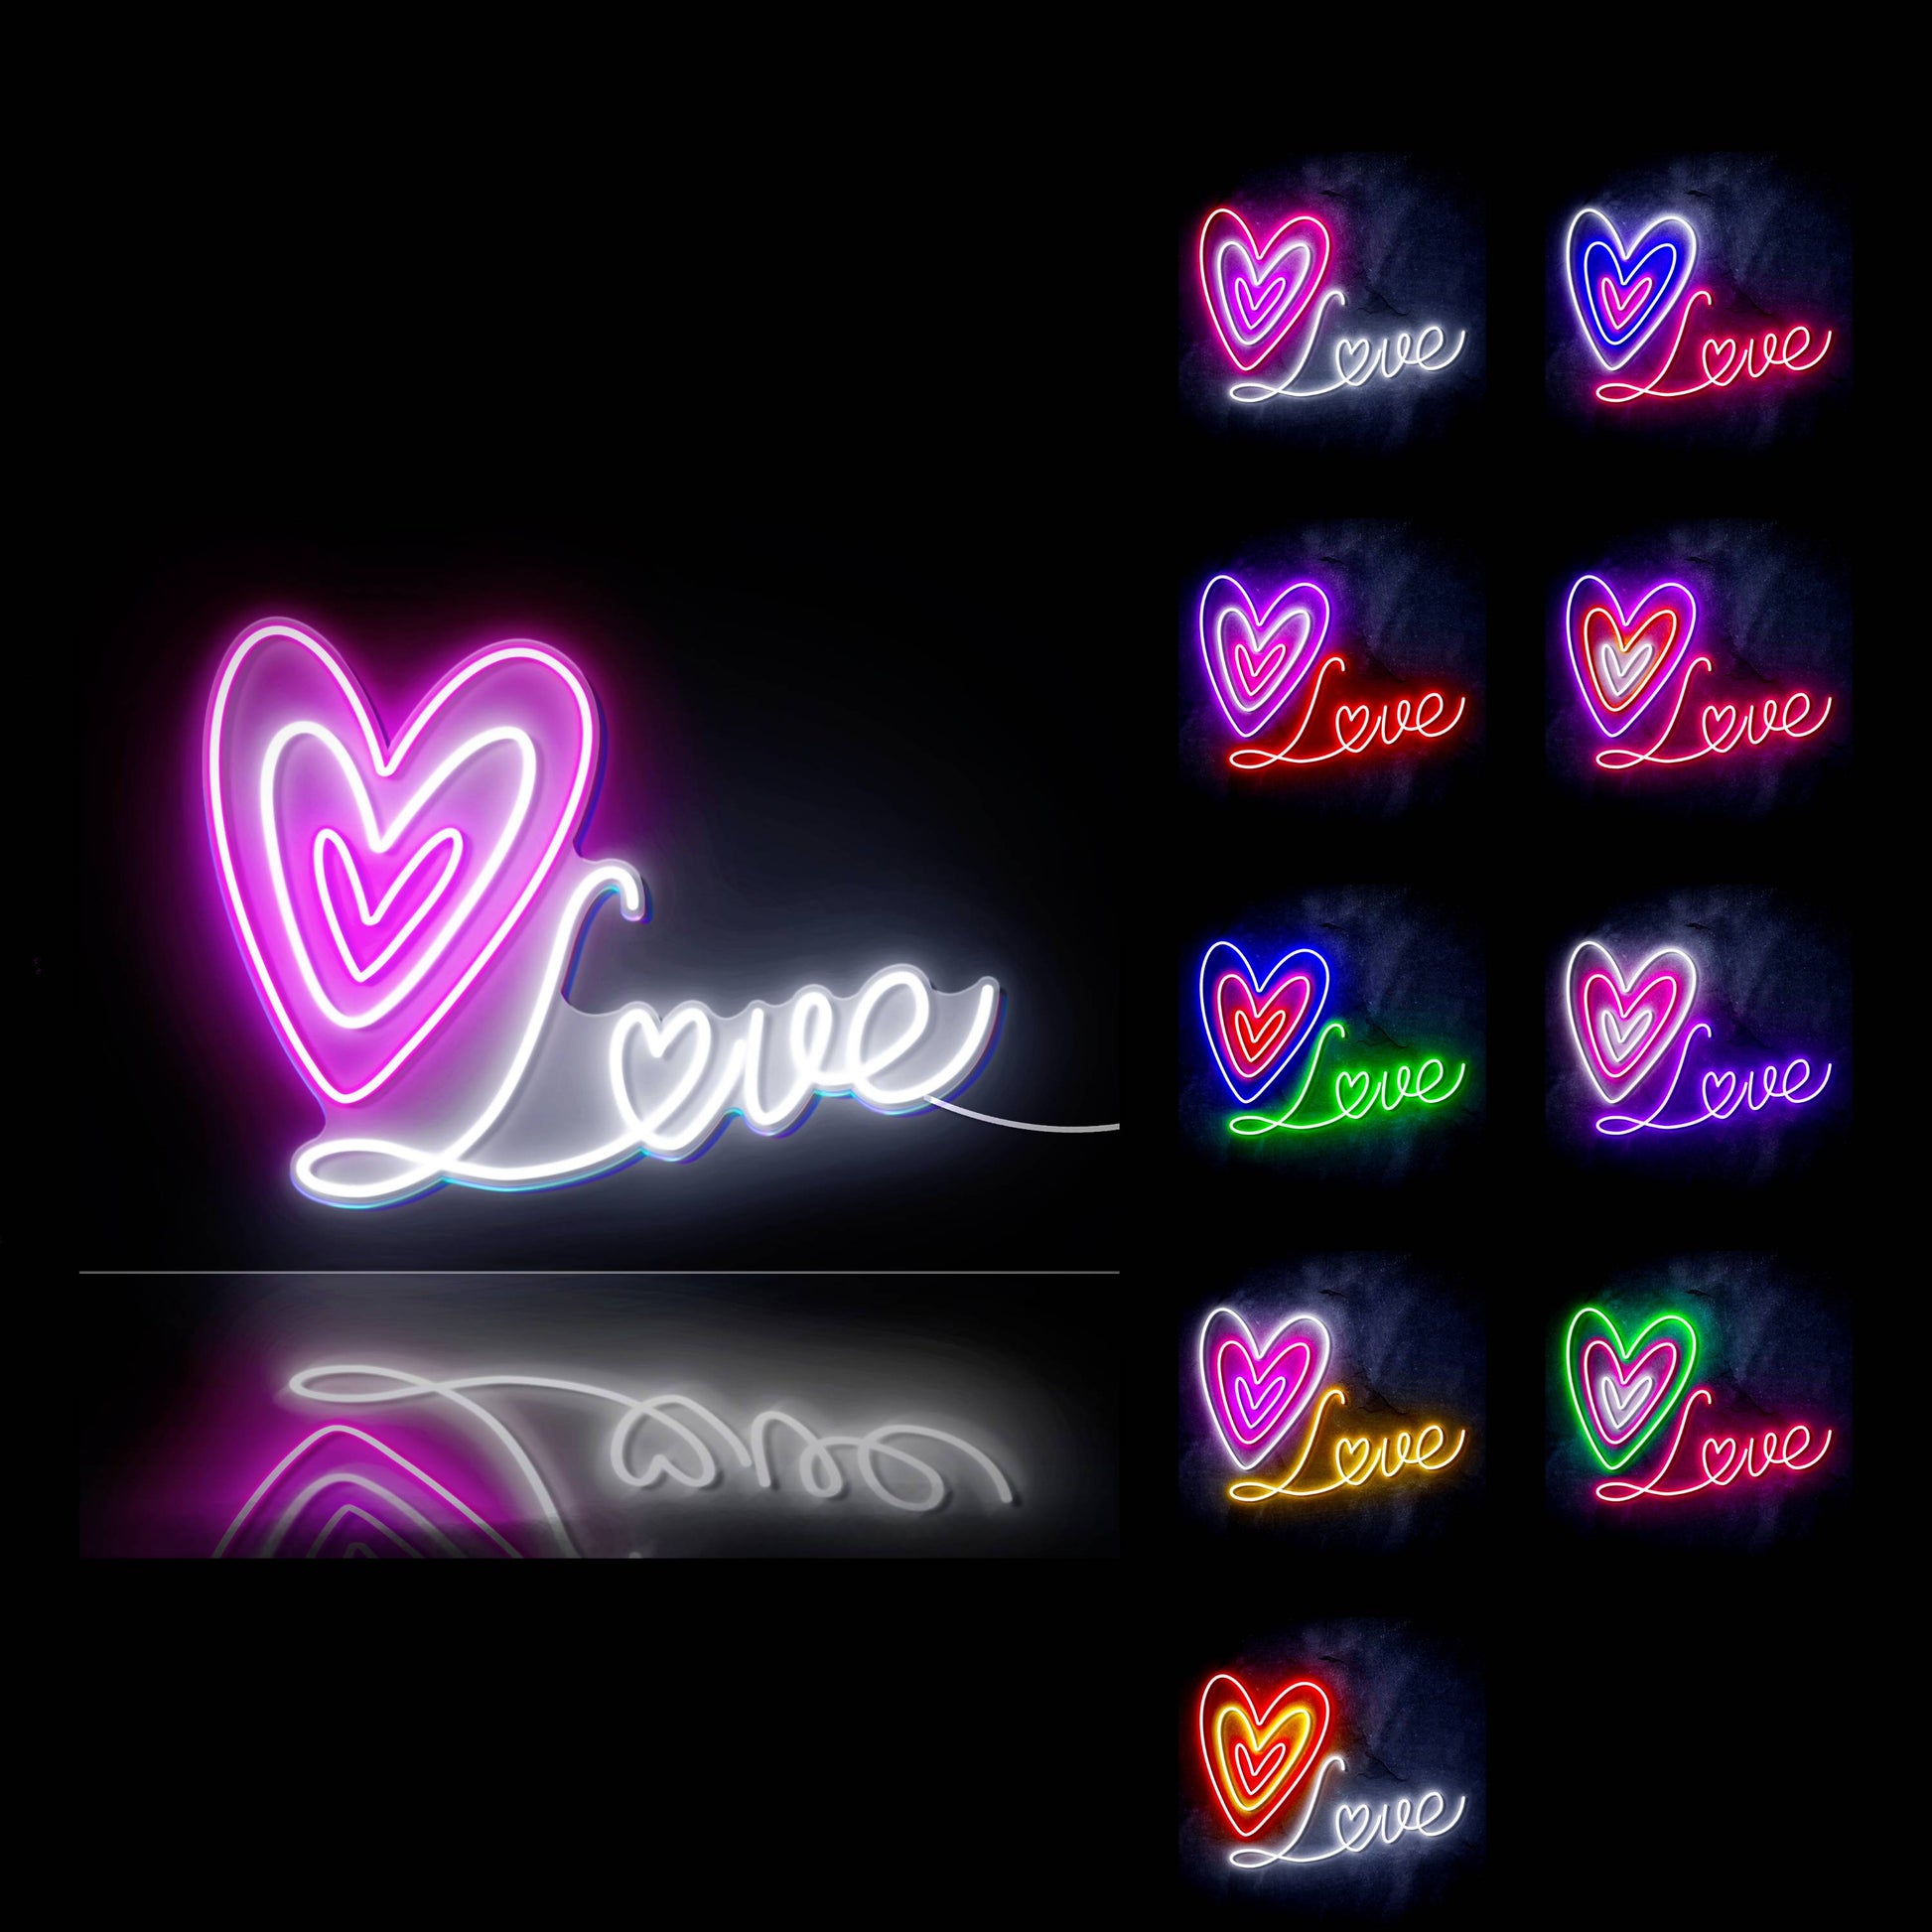 Three Hearts Light Up Wall Art Adorable Neon Heart Sign for Sale